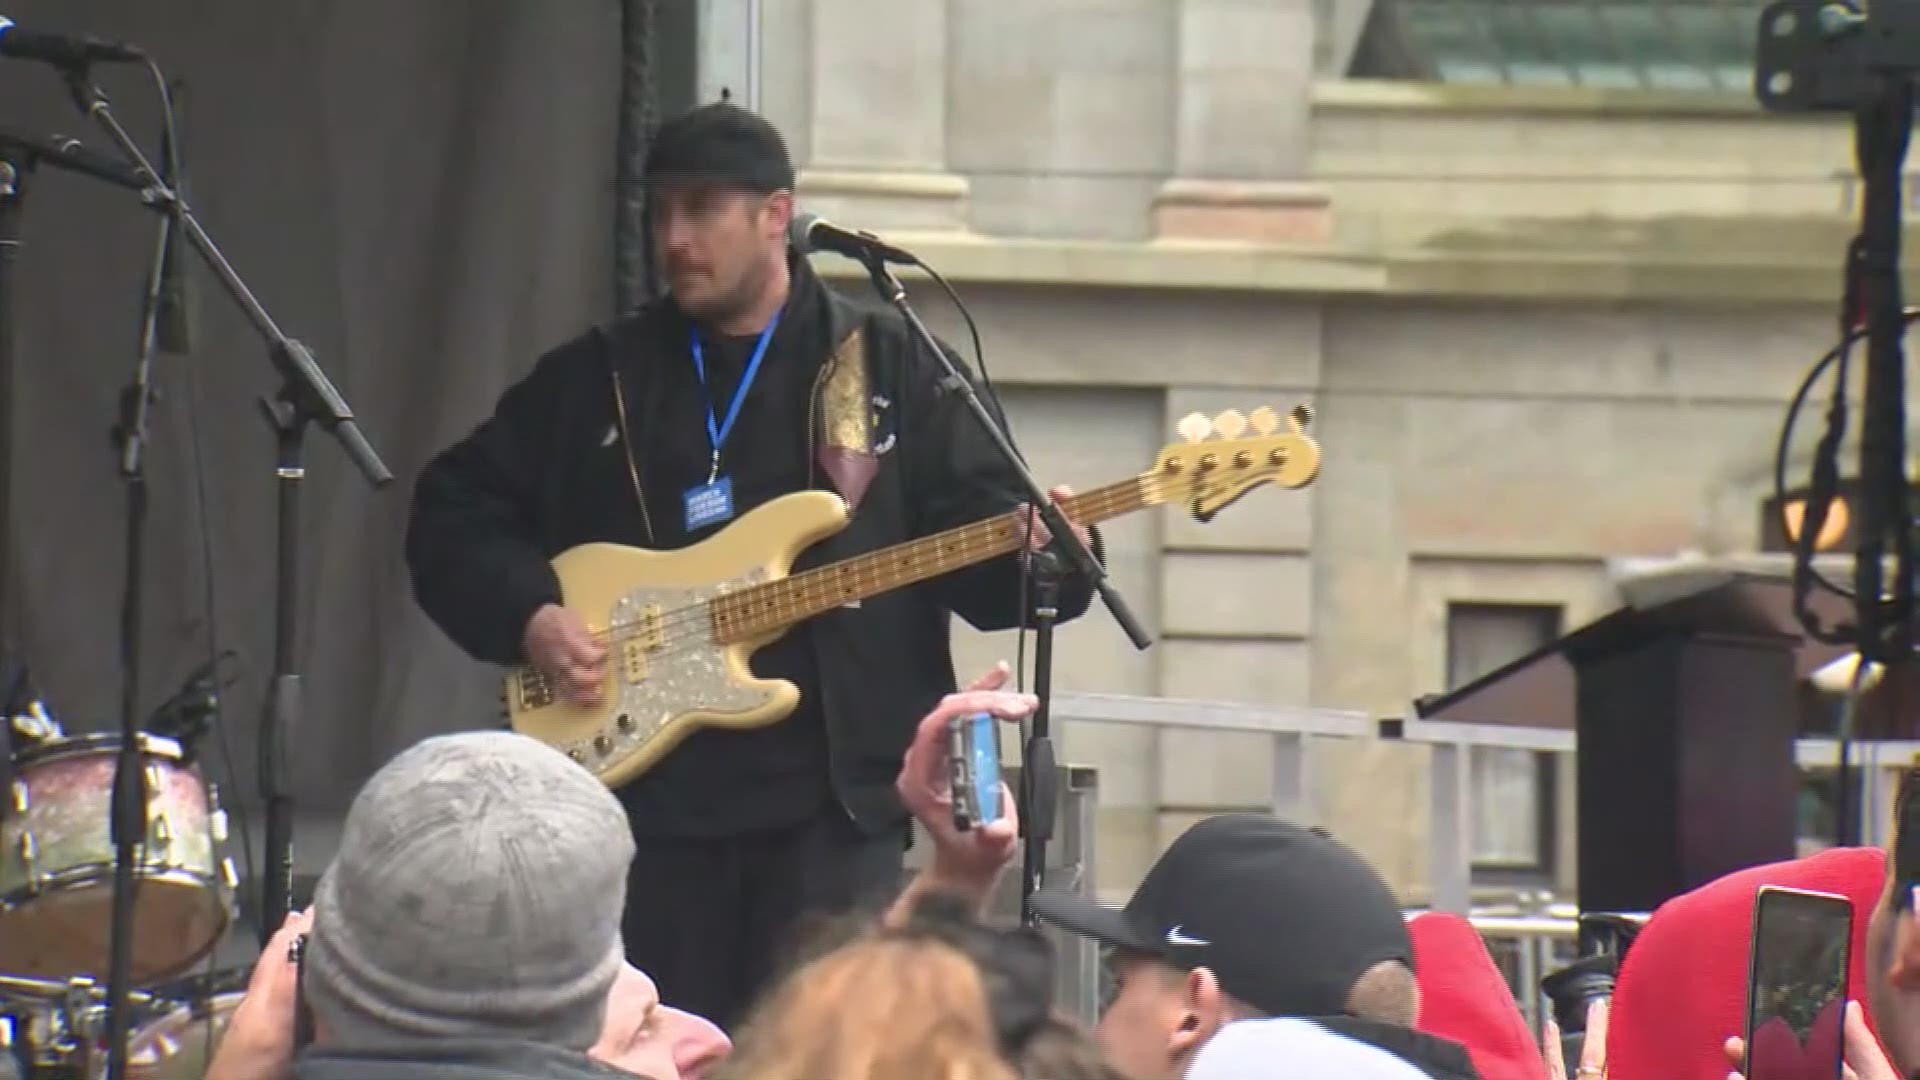 Portgual. The Man plays their Grammy Award winning hit "Feel It Still" at the March for Our Lives rally in Portland.